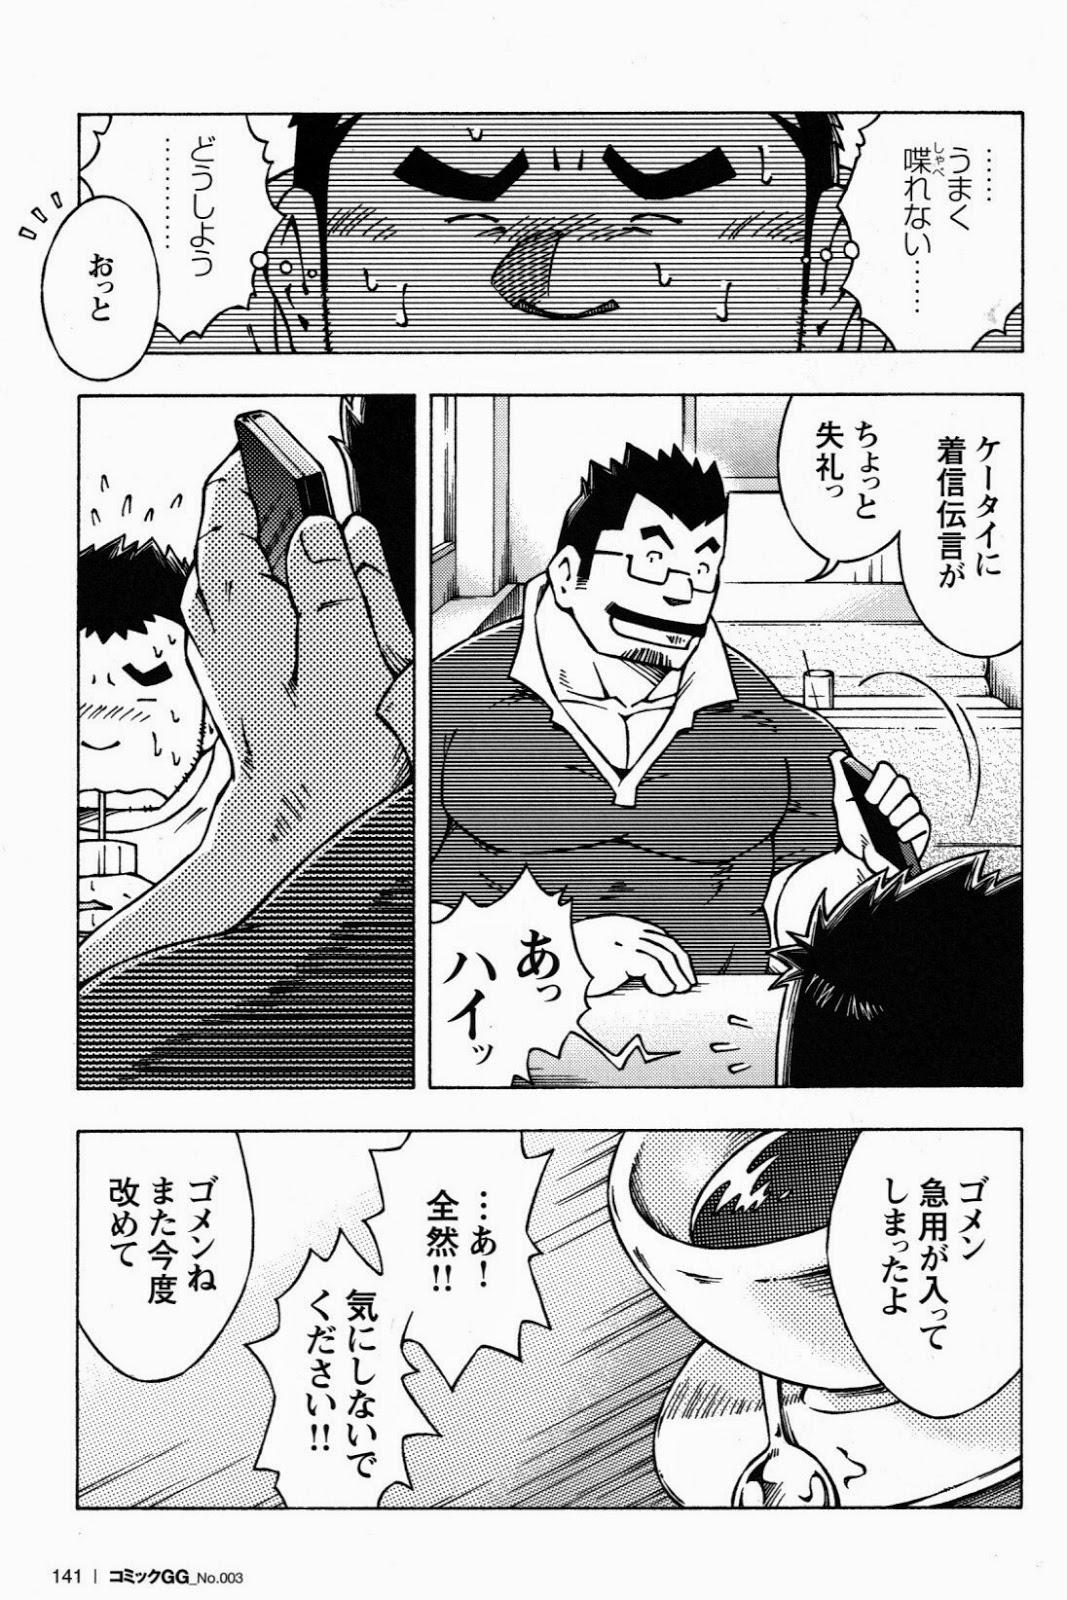 Foot 恋愛掲示板 Chibola - Page 5